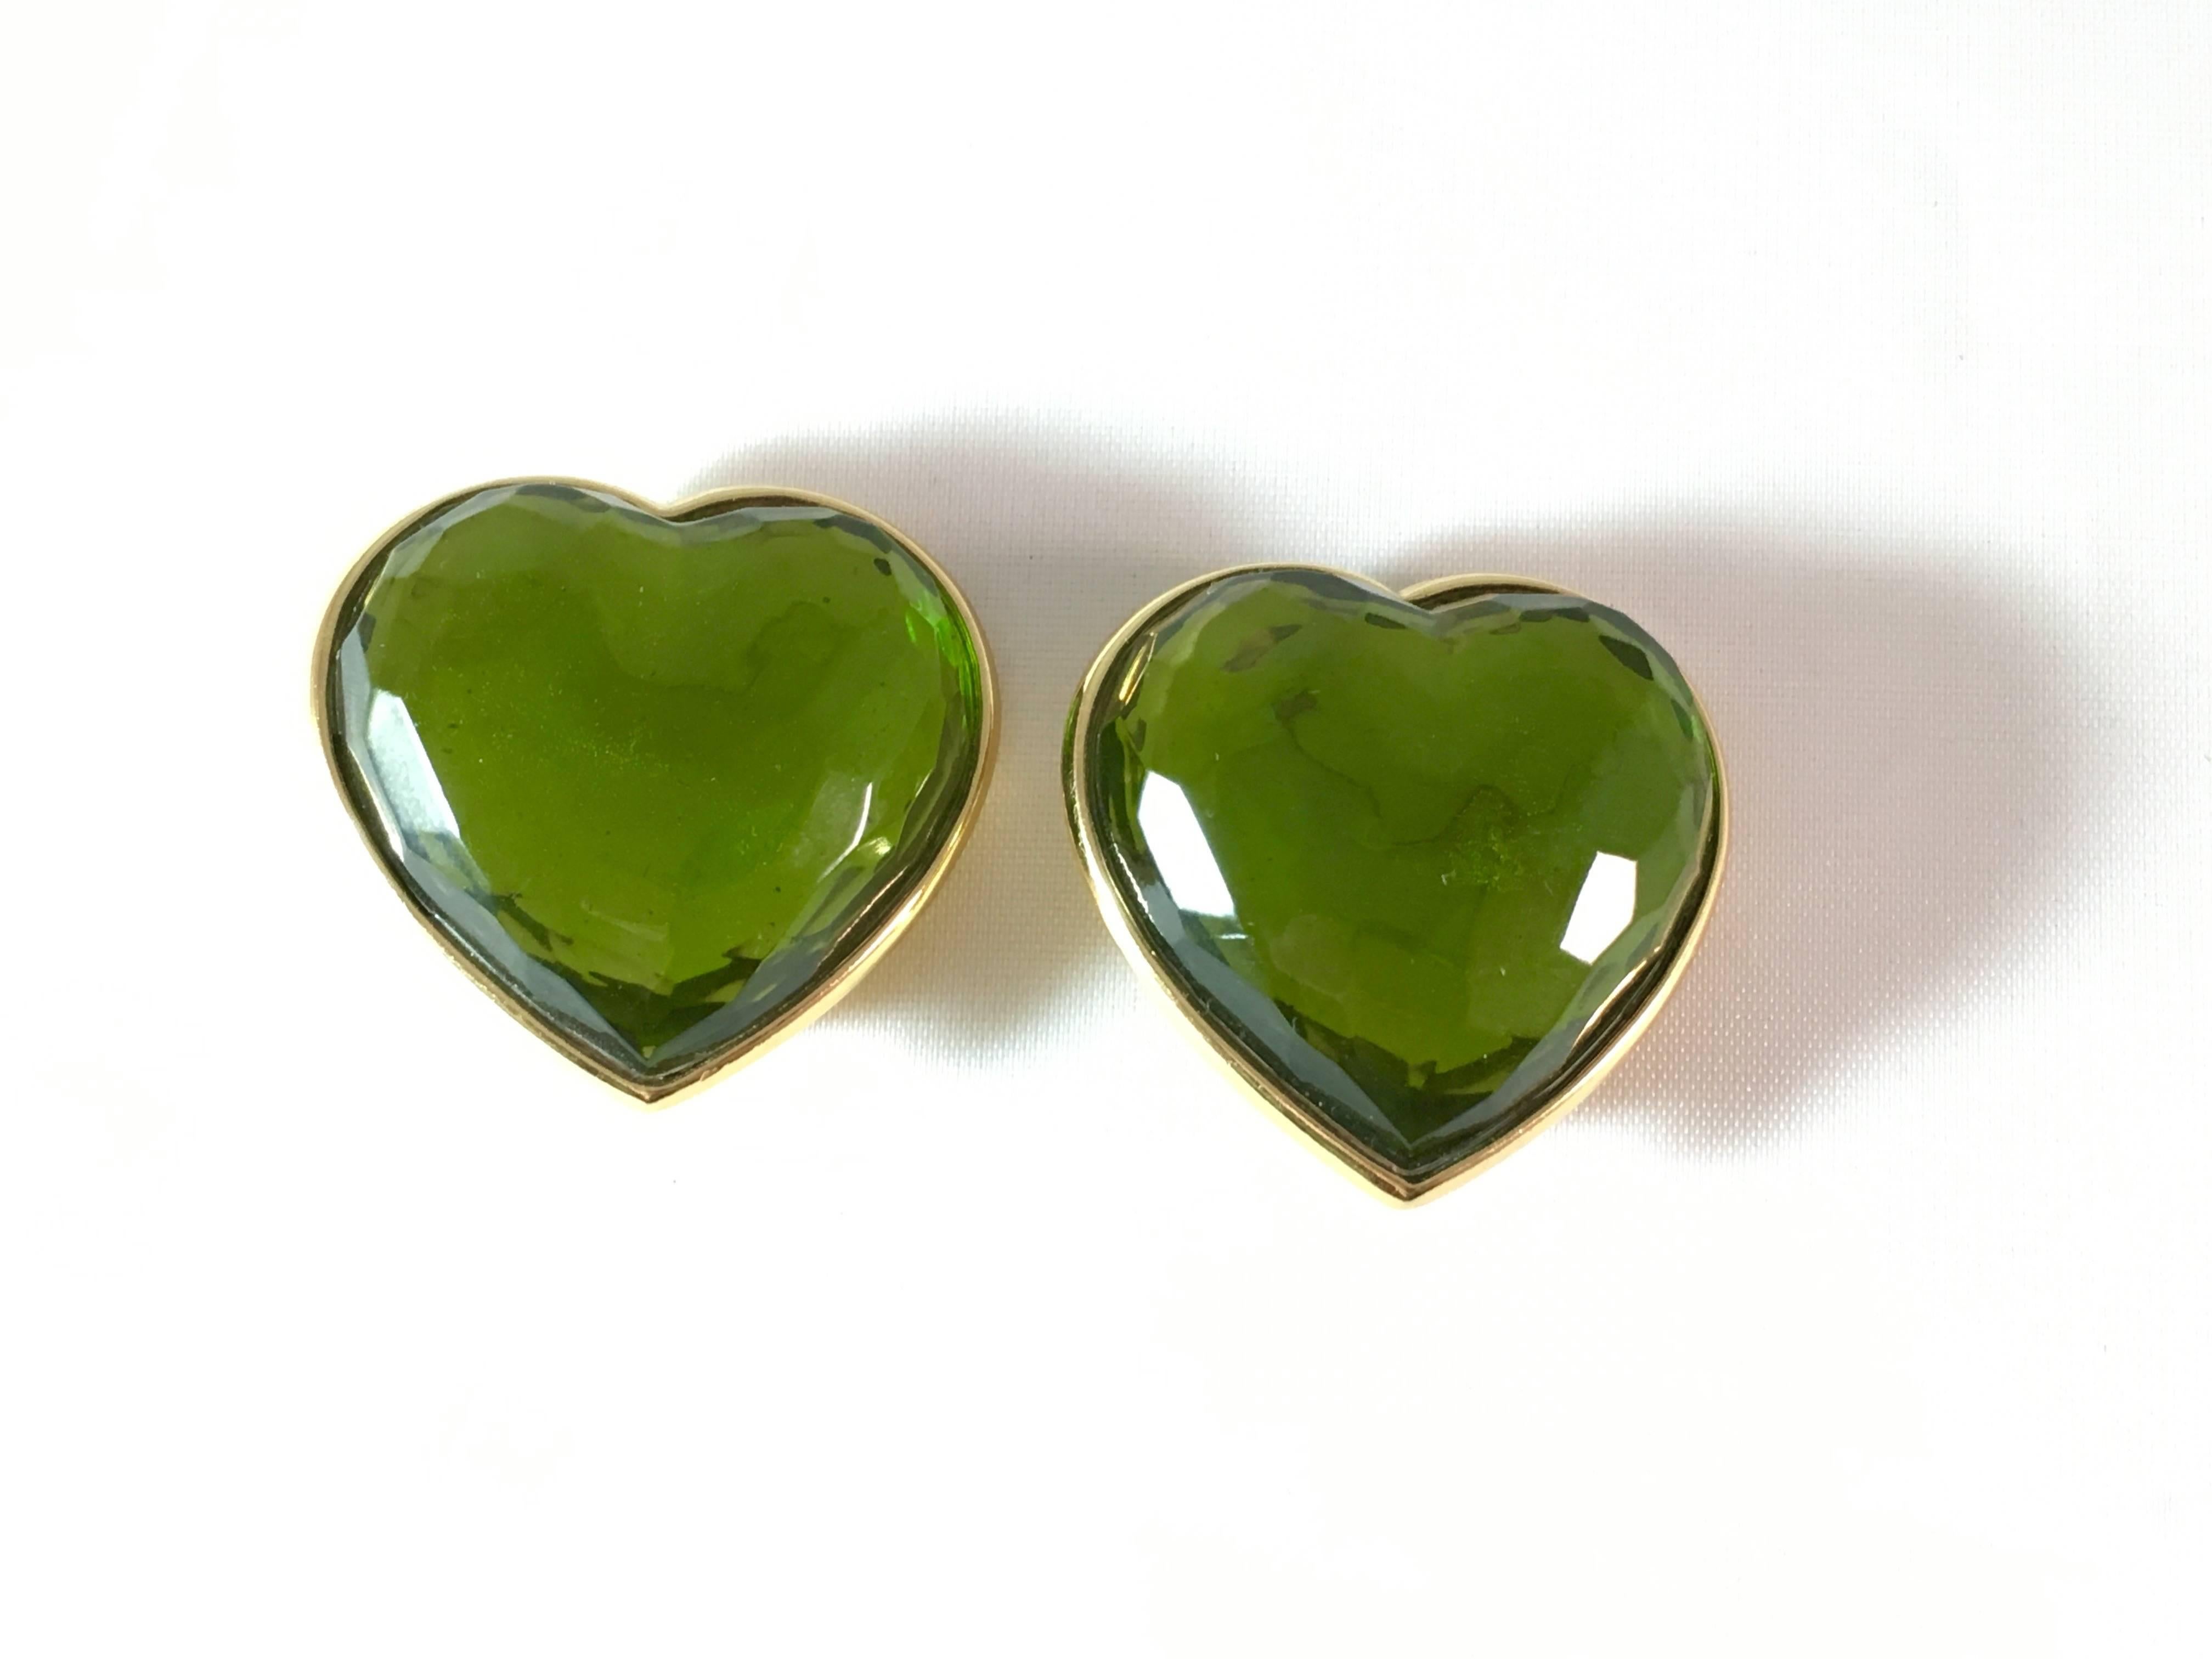 This is a pair of fabulous Yves Saint Laurent green glass heart clip-on earrings from the 1980s. They are signed 'Made in France' on the back of the earrings and 'YSL' on the back of the clips. The clips are strong and the earrings are in excellent